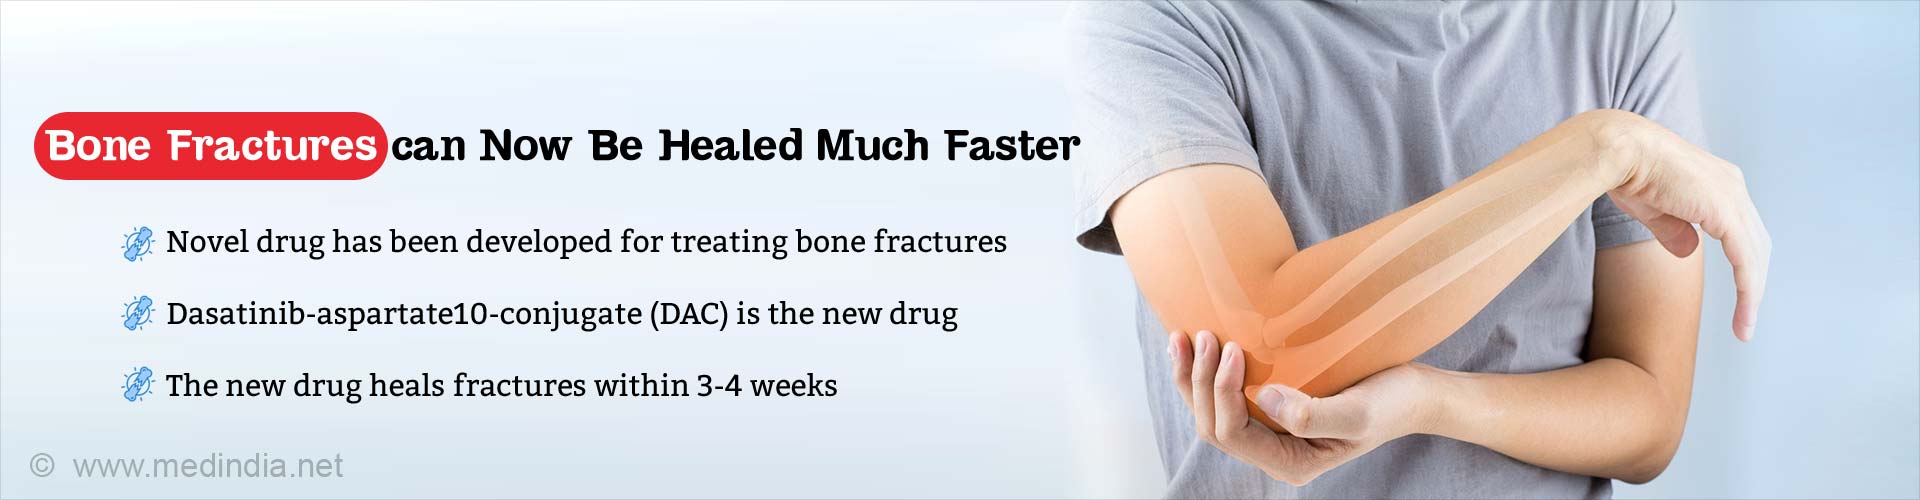 Bone fractures can now be healed much faster. Novel drug has been developed for treating bone fractures. Dasatinib-aspartate10-conjugate (DAC) is the new drug. The new drug heals fractures within 3-4 weeks.